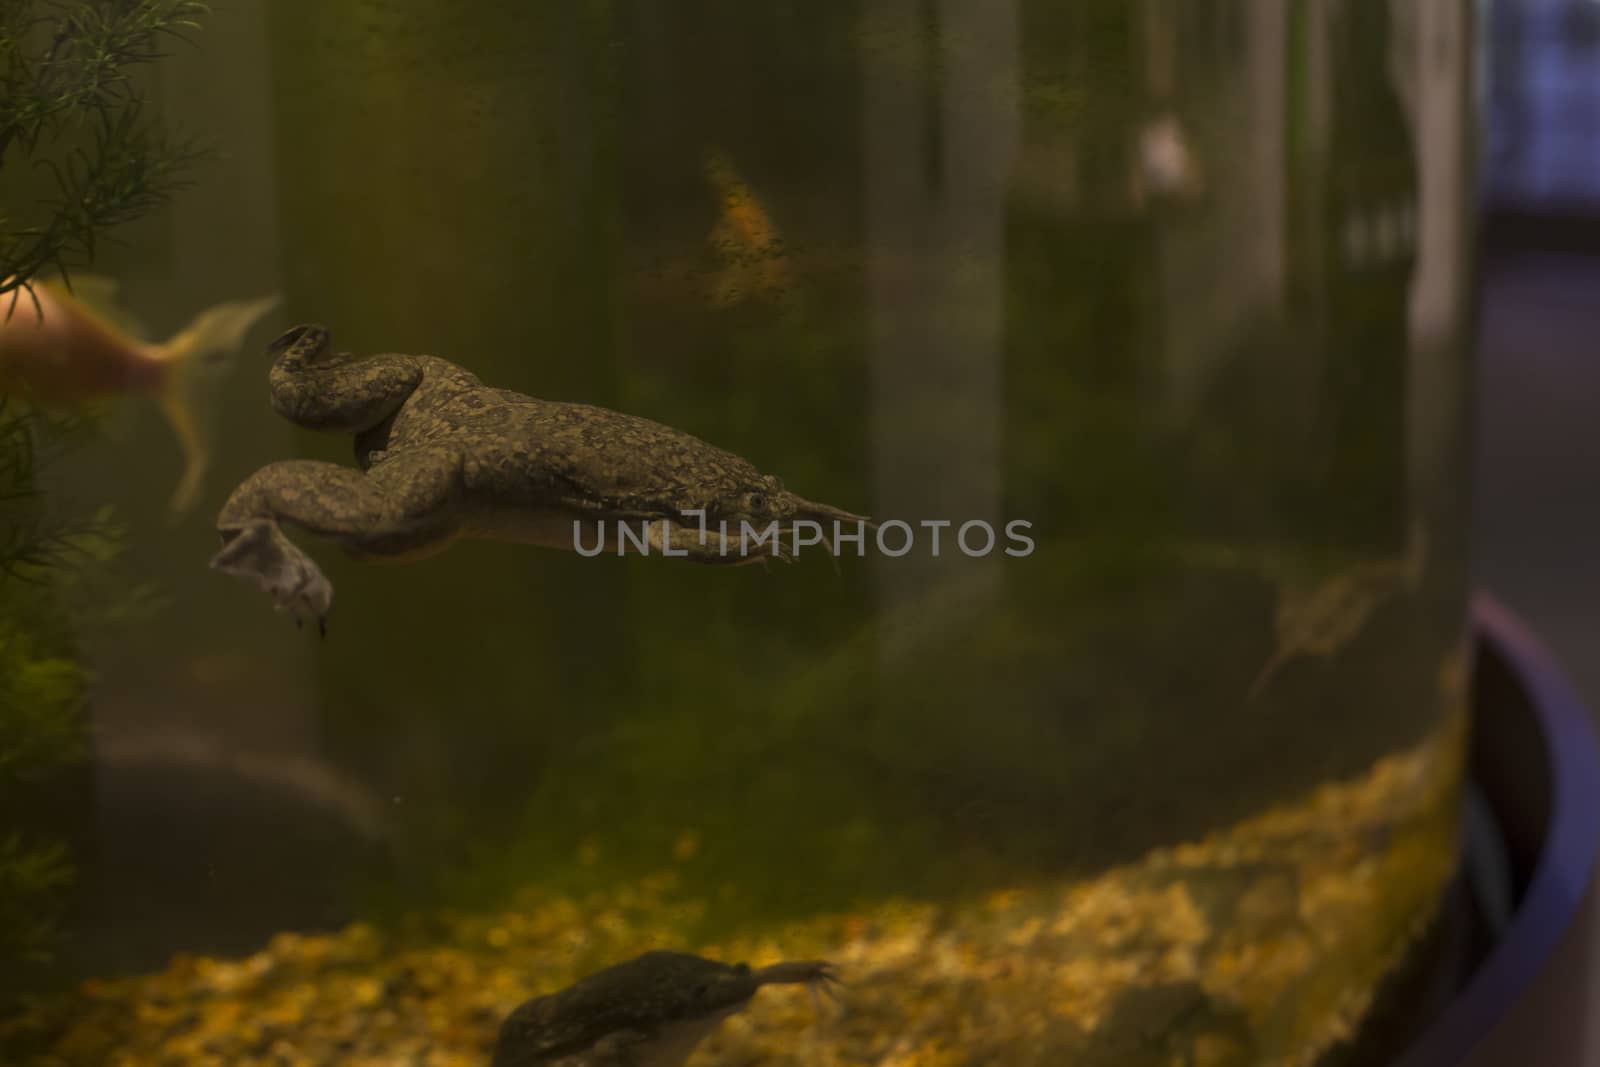 African clawed frog (Xenopus laevis) swimming in a tank